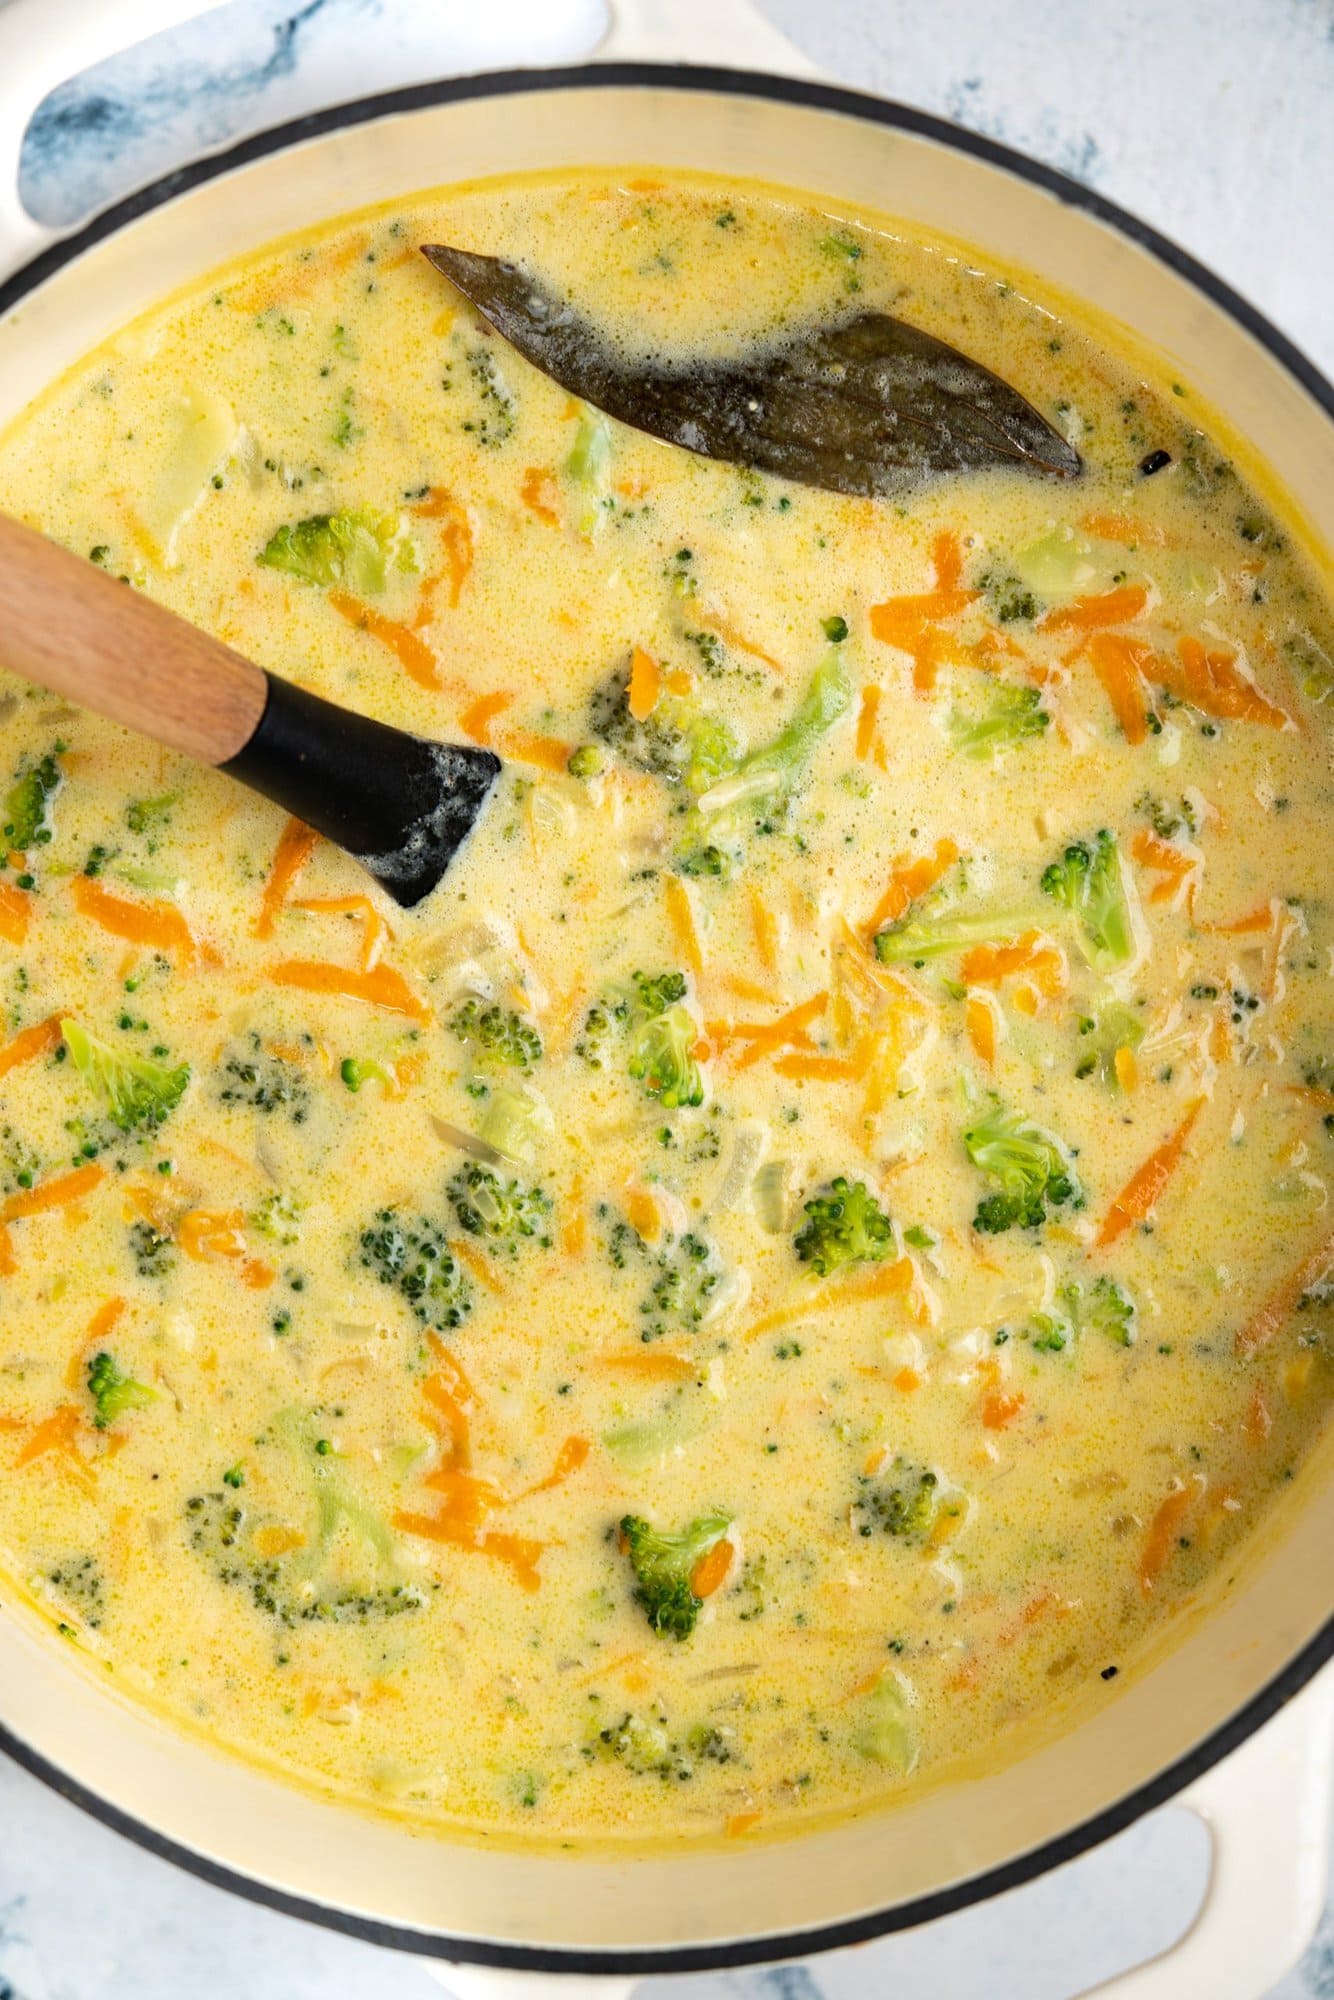 Broccoli cheddar cheese soup is cooked in a dutch oven with spices and herbs.